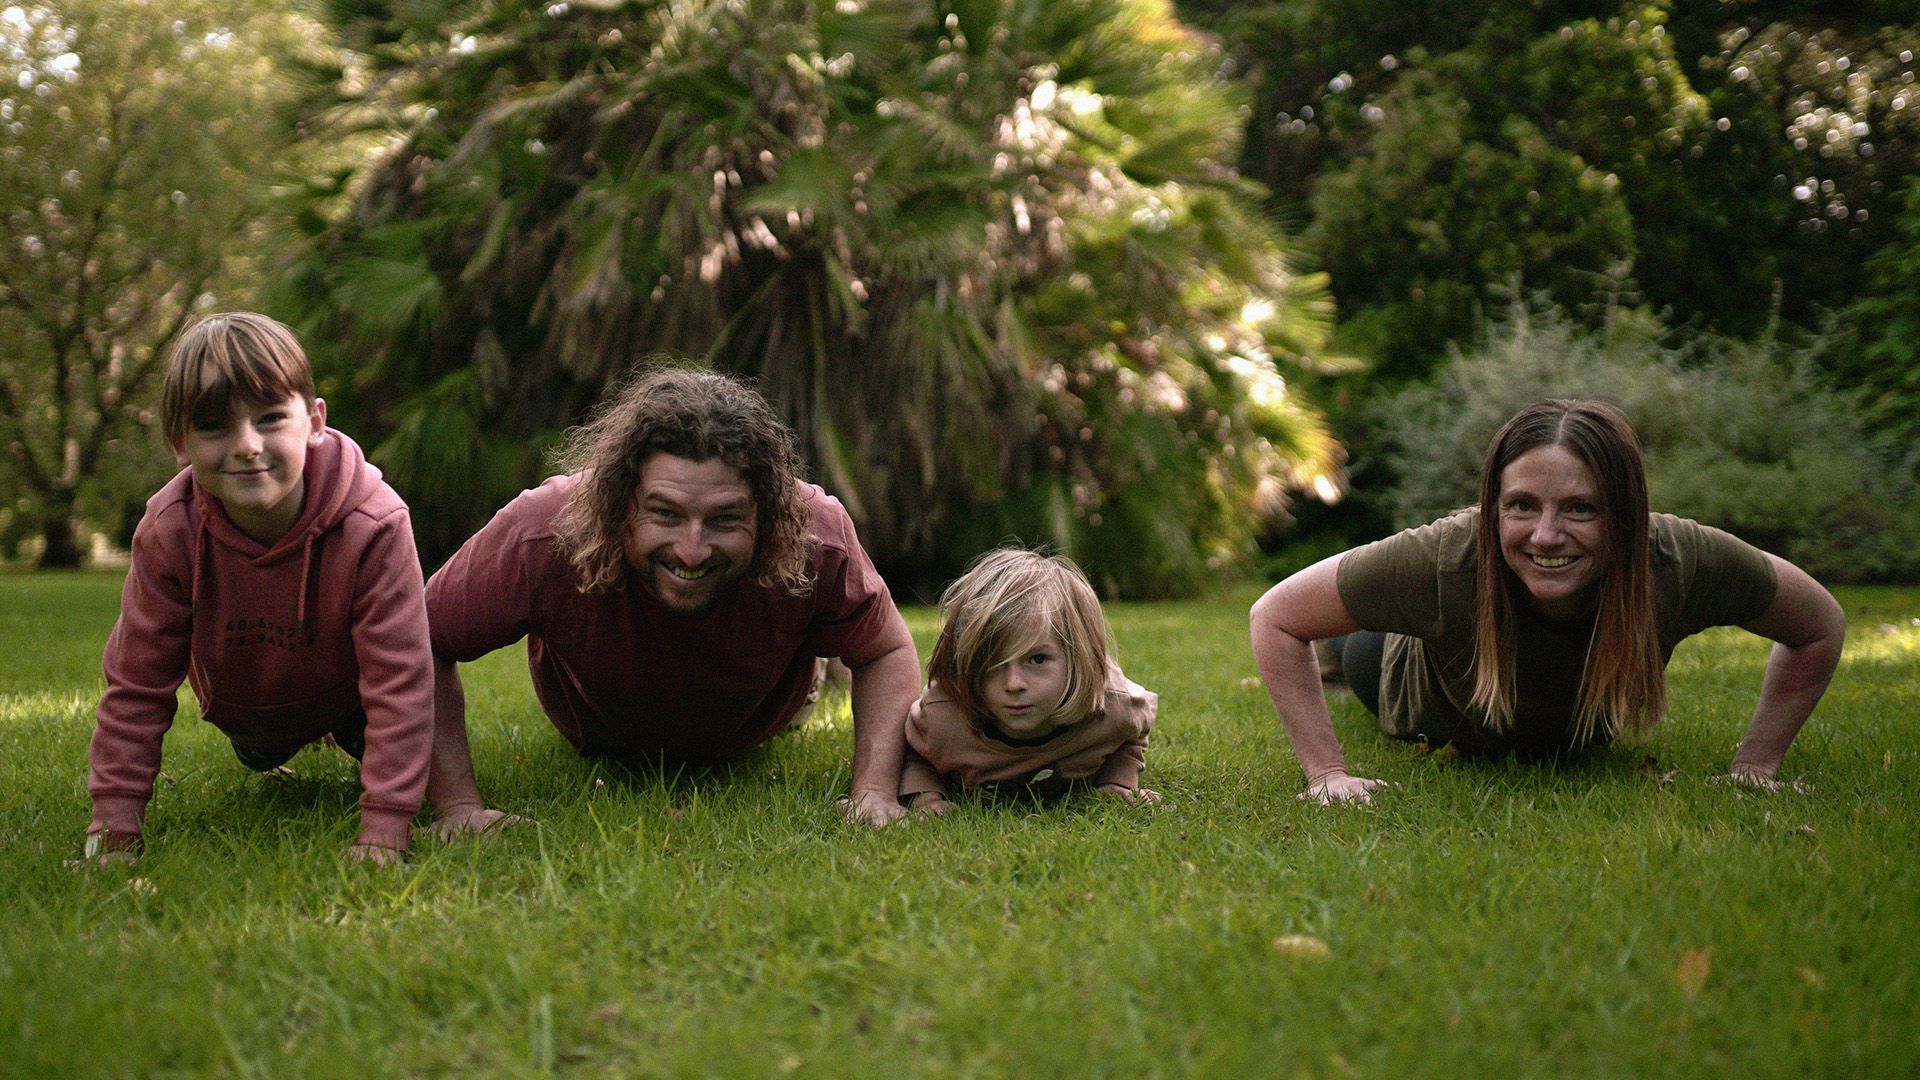 The Bailey family pushing up together on grass in a park.